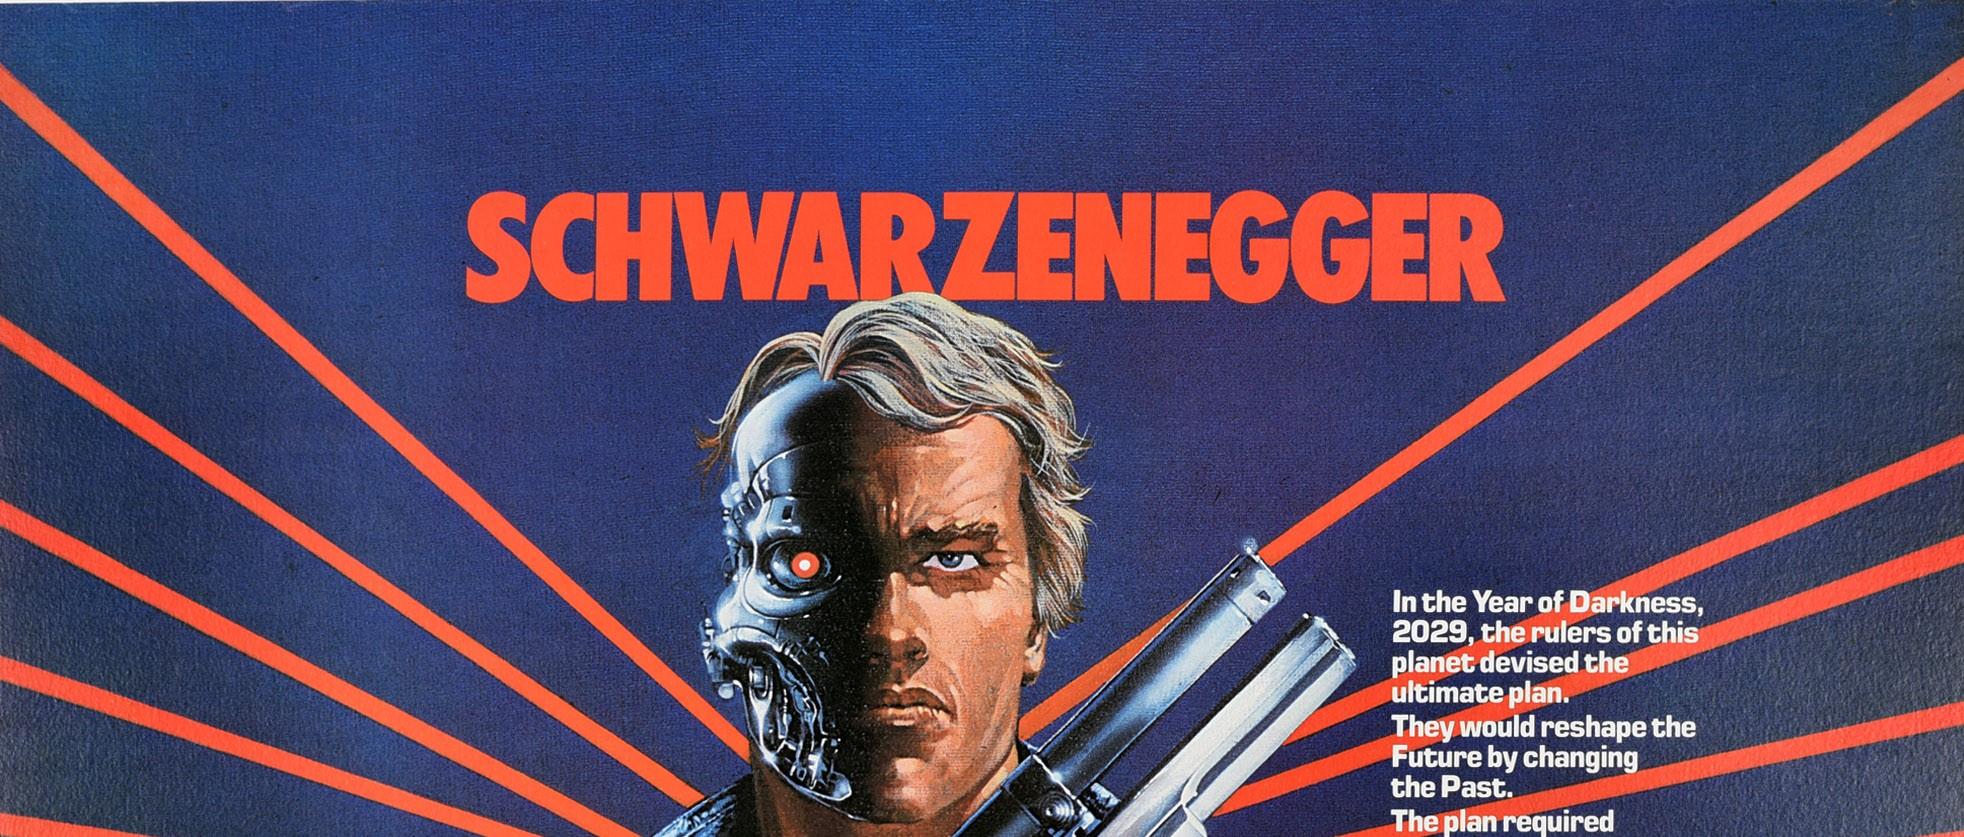 Original vintage UK quad movie poster for the 1984 American science fiction film directed by James Cameron - The Terminator - starring Arnold Schwarzenegger in the lead role, Michael Biehn, Linda Hamilton as Sarah Connor, and Paul Winfield about a